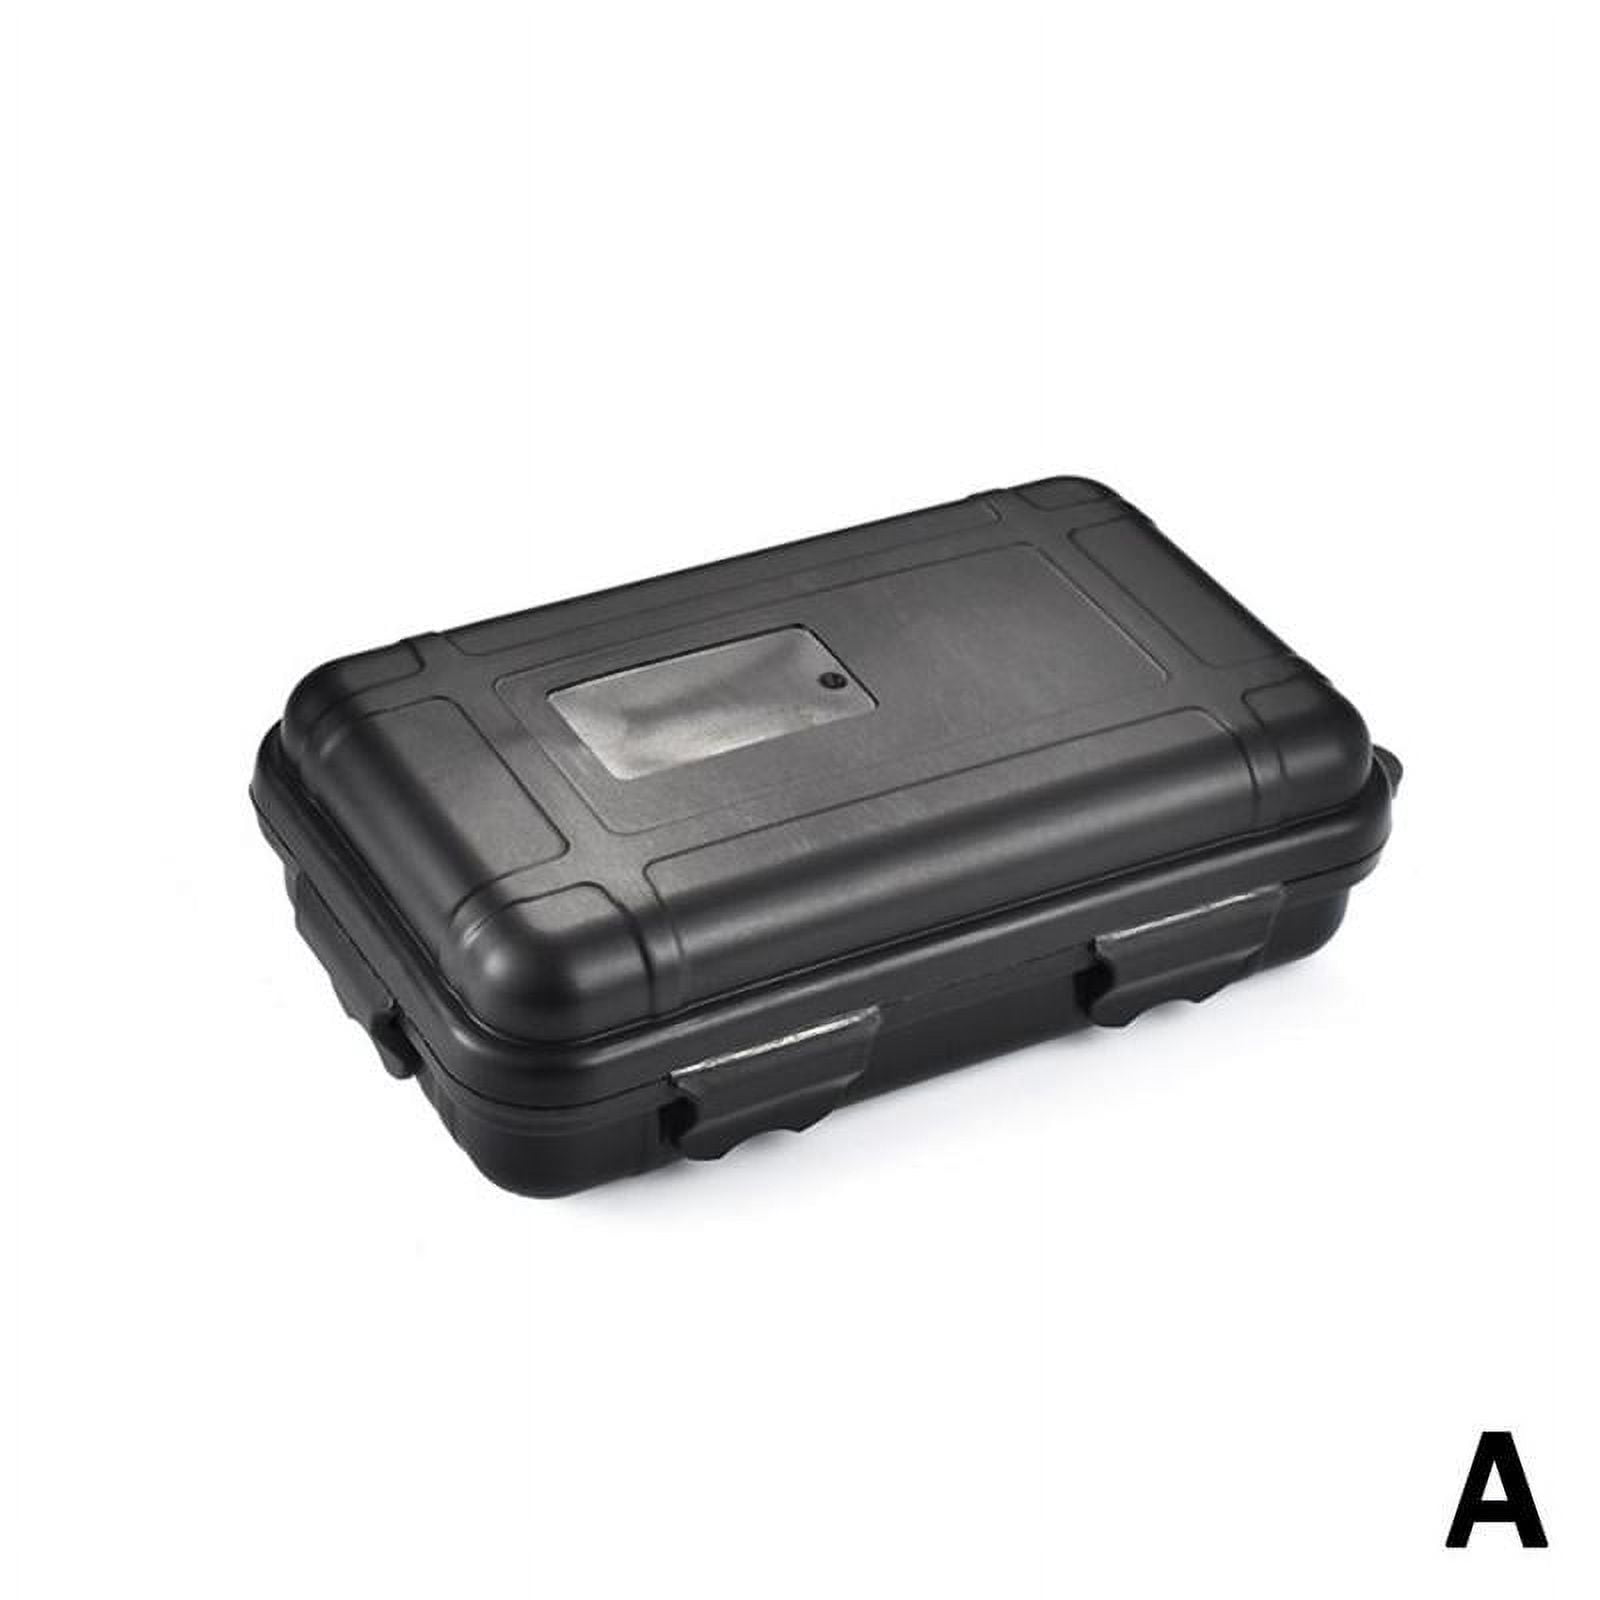 Huele 2pcs Outdoor Plastic Waterproof Shockproof Box Airtight Survival Case Container Storage Carry Box Small ?5.31'' x 3.15 